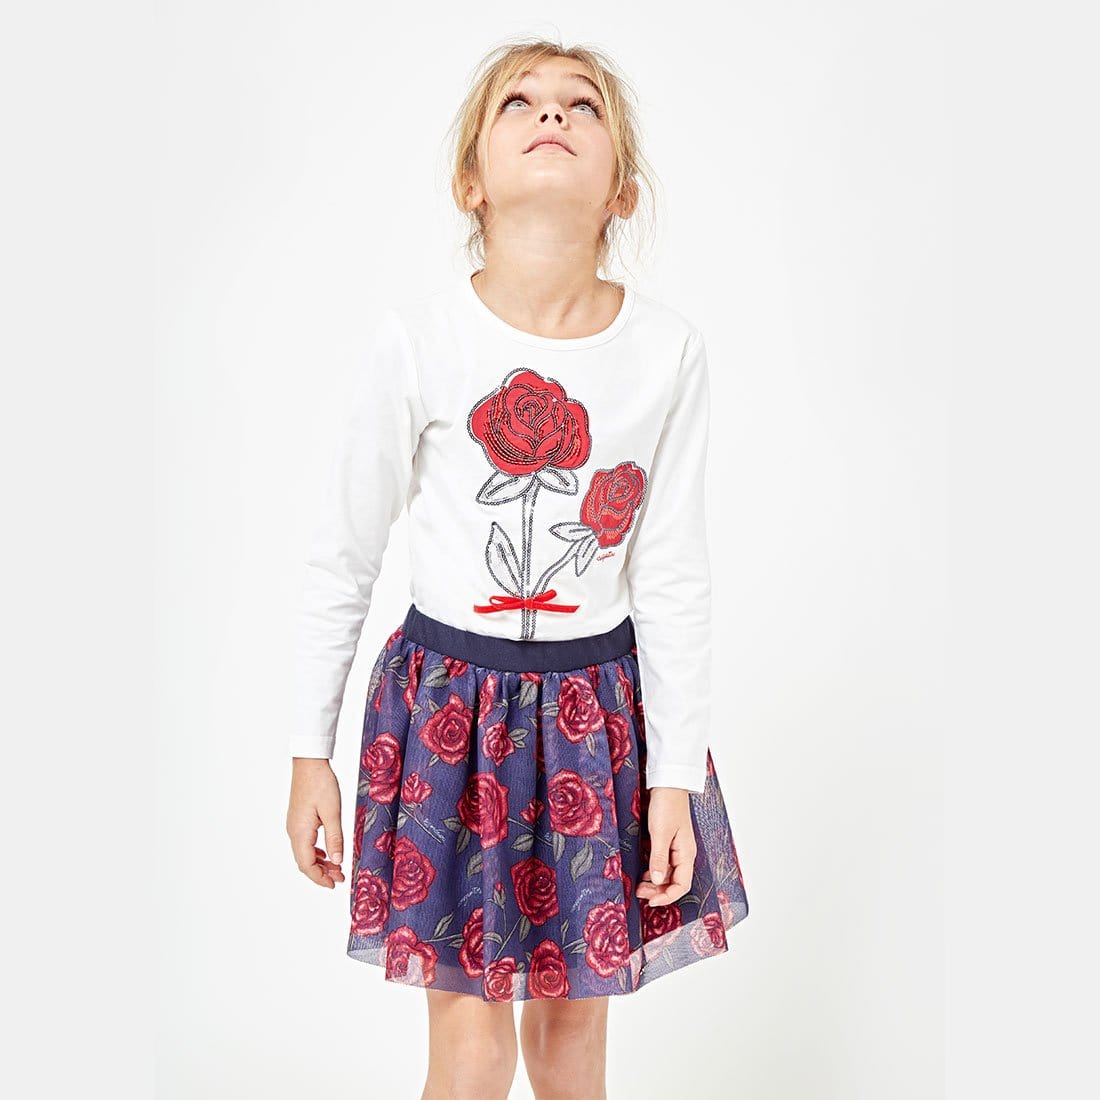 CONGUITOS TEXTIL Clothing Girls "Sequin Roses" White T-shirt